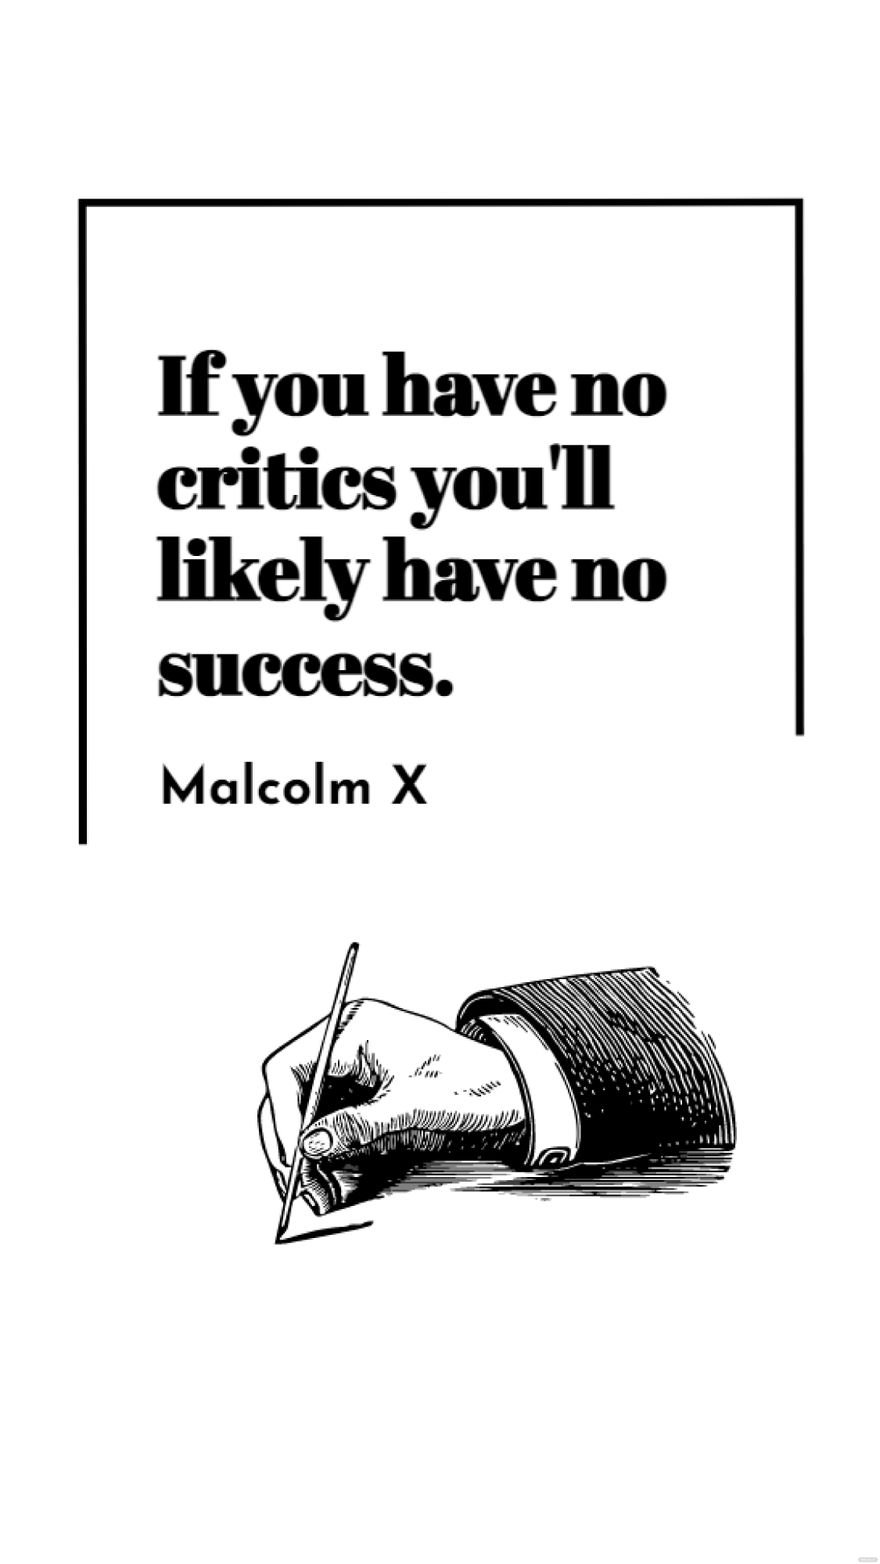 Free Malcolm X - If you have no critics you'll likely have no success.